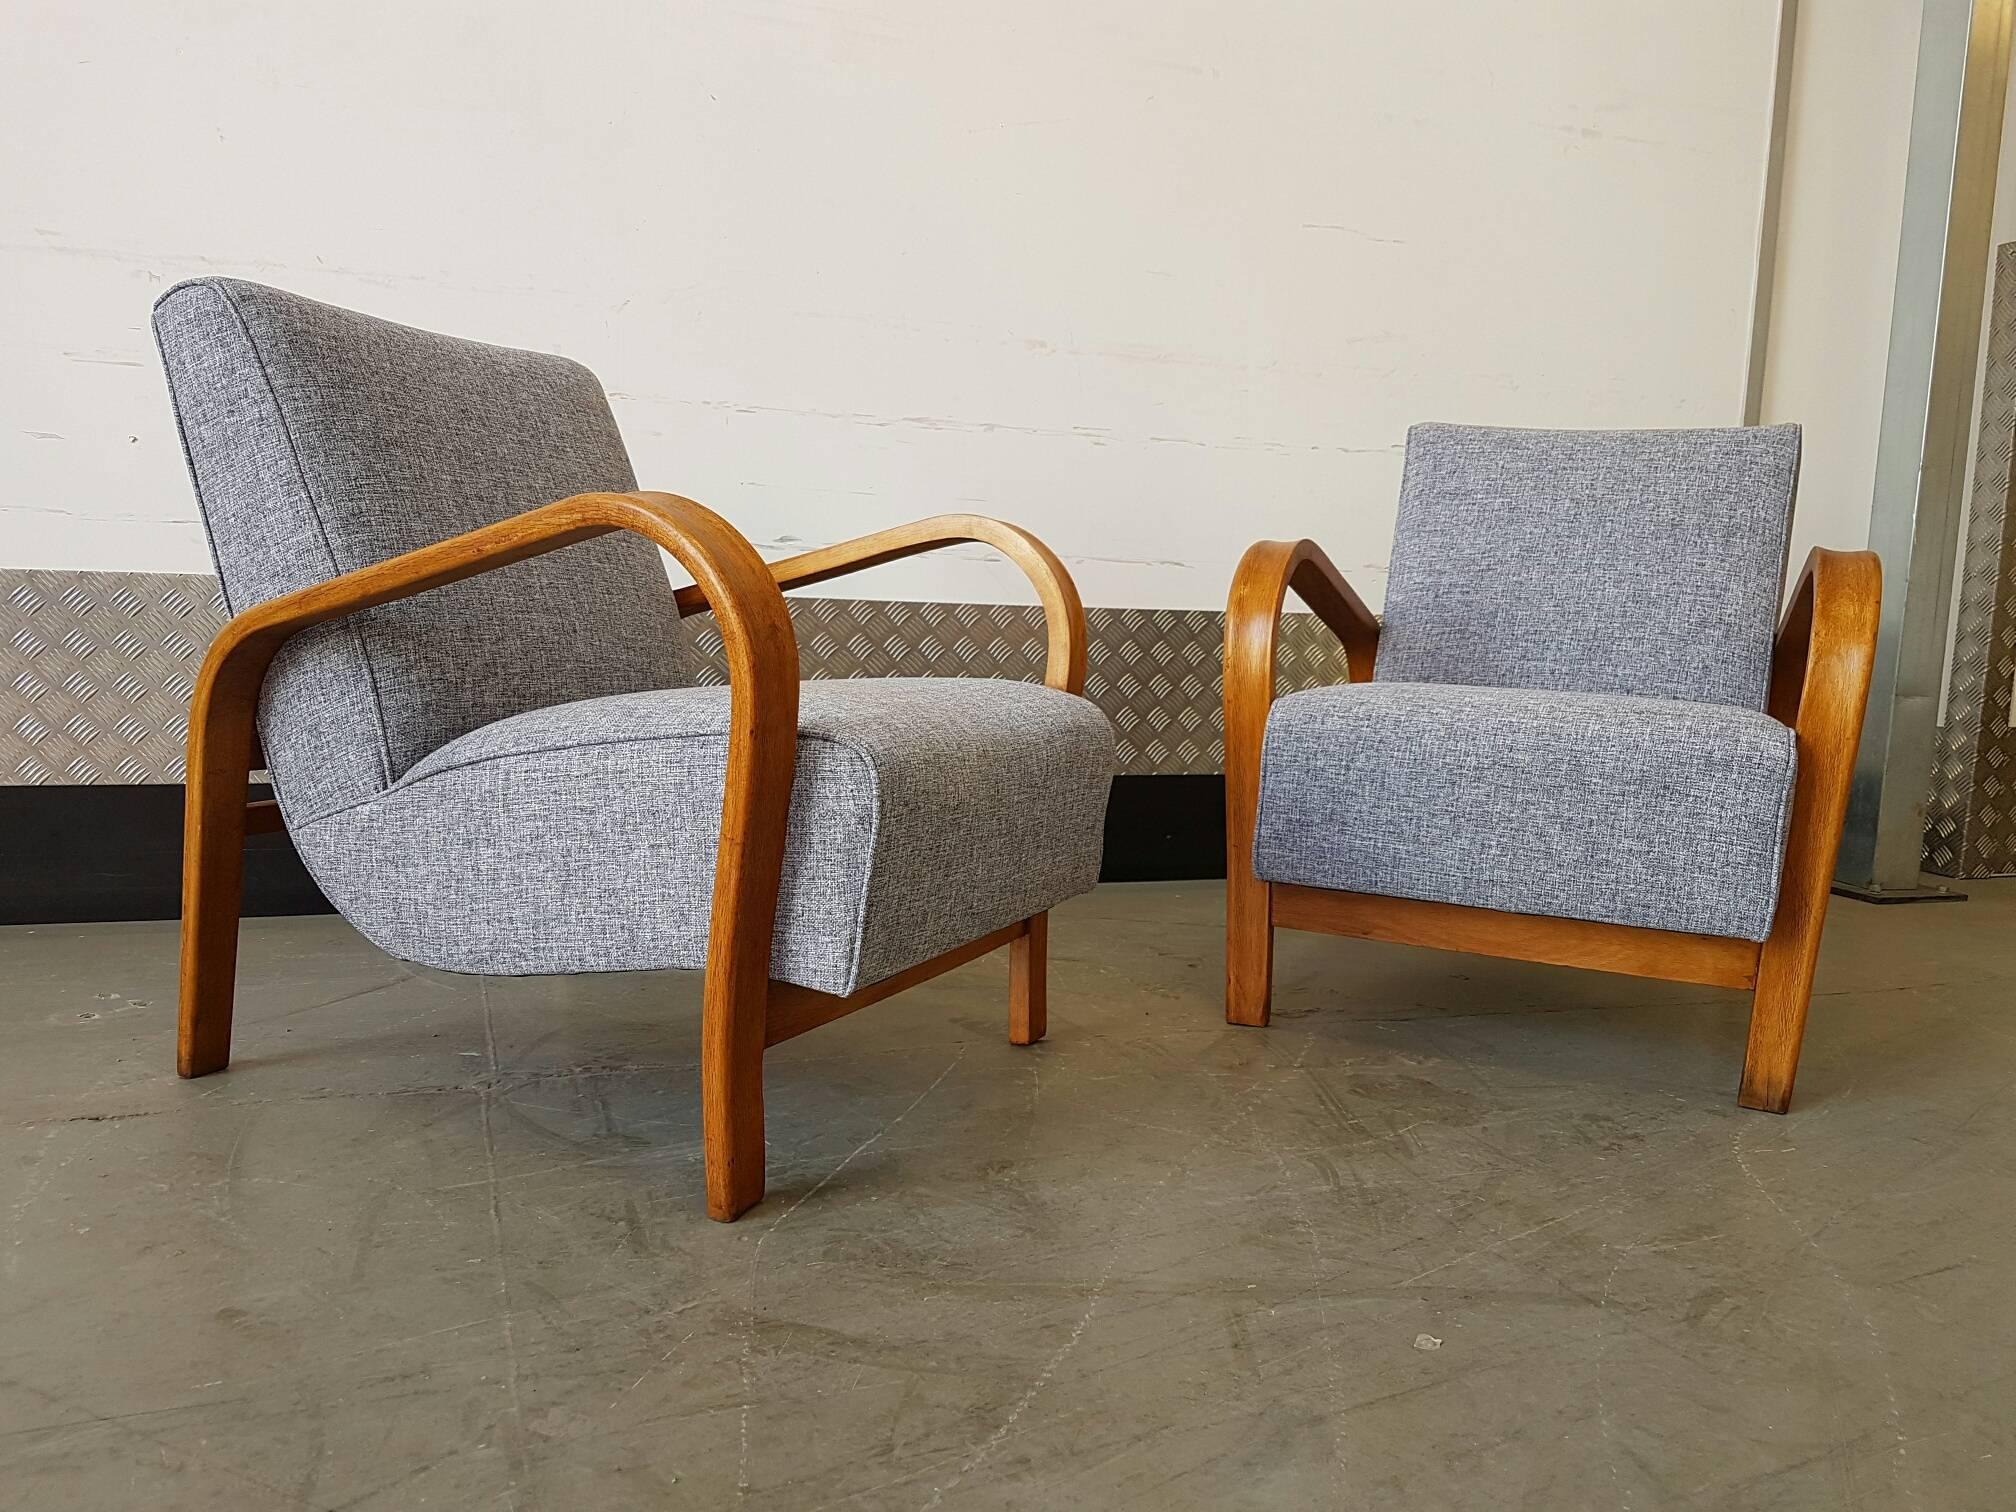 A pair of armchairs, in wood and fabric by Jindrich Halabala, Czech Republic, 1930s. Variant of the famous Halabala lounge chair. These easy chairs have an elegant curved frame of bentwood. The seating is very comfortable due the springs. The shapes